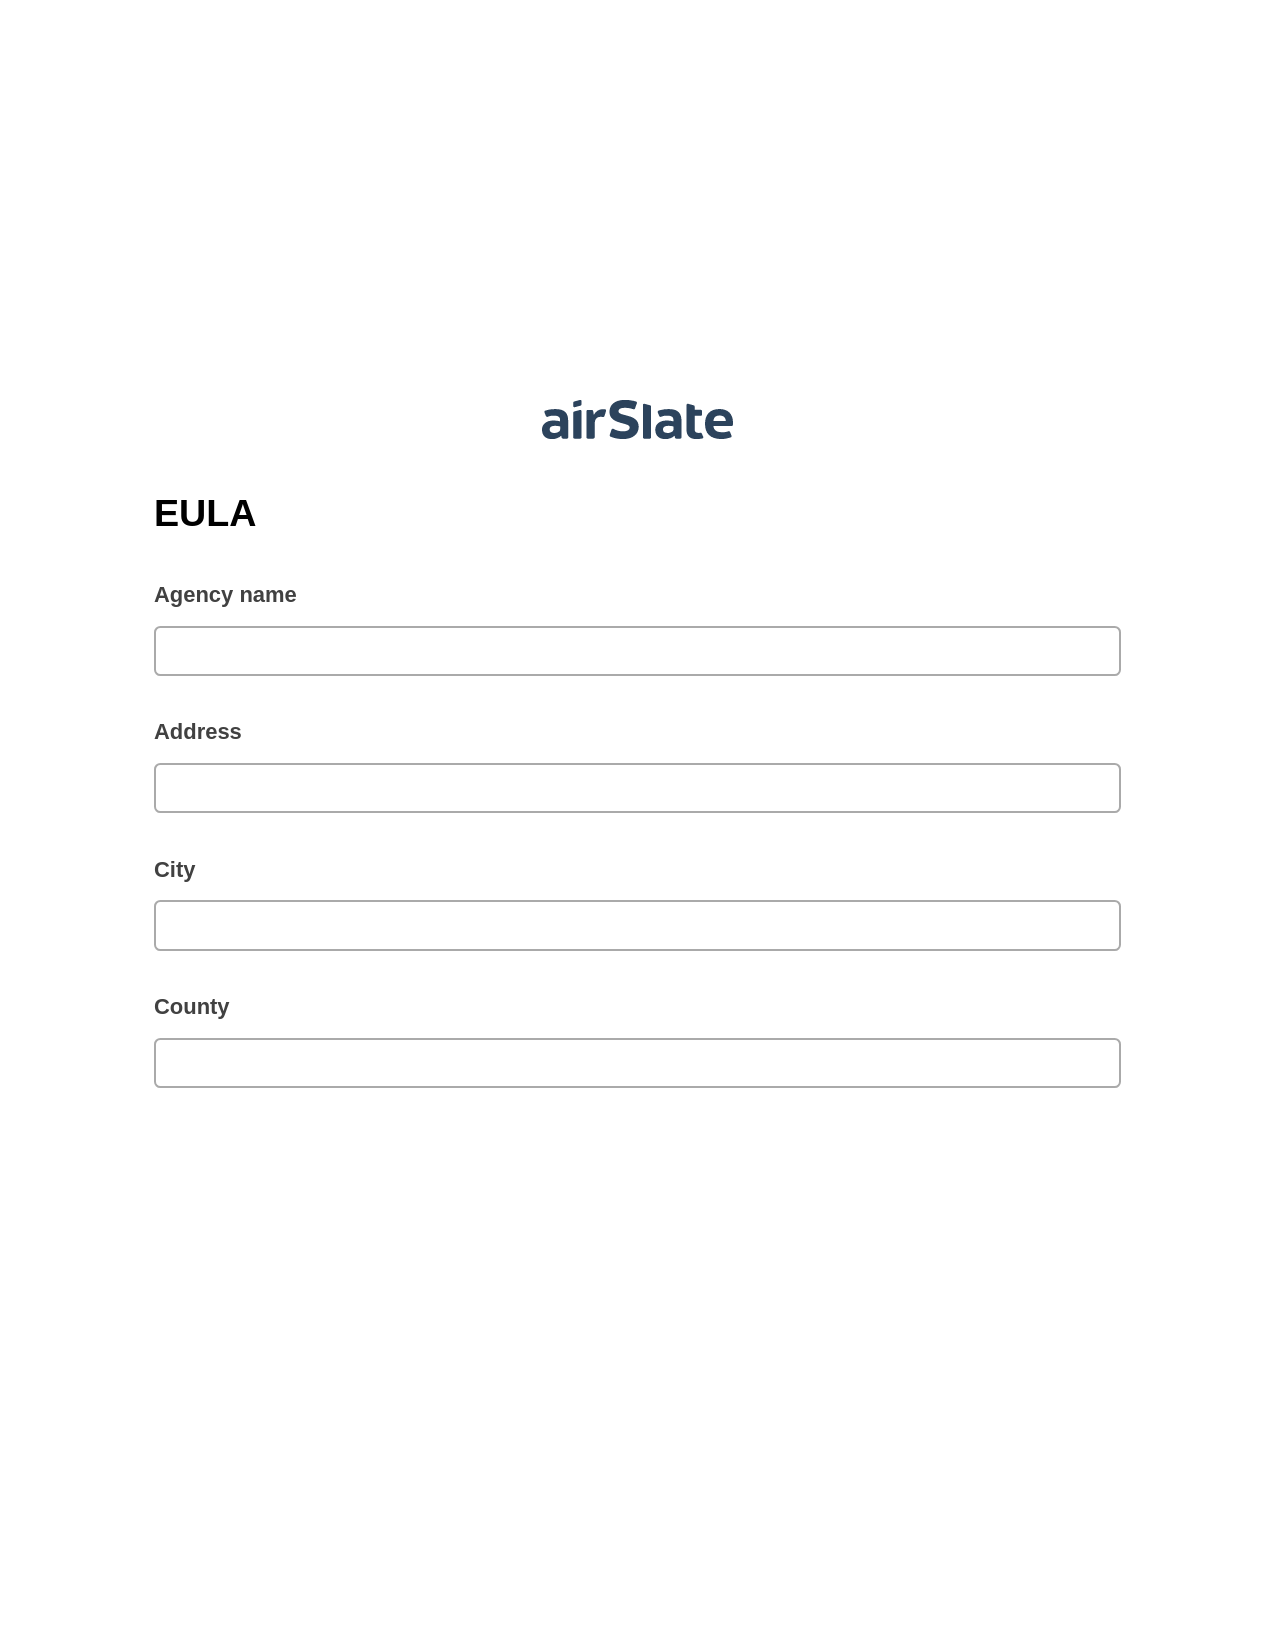 EULA Pre-fill Dropdown from Airtable, Document Hide Bot, Export to Excel 365 Bot